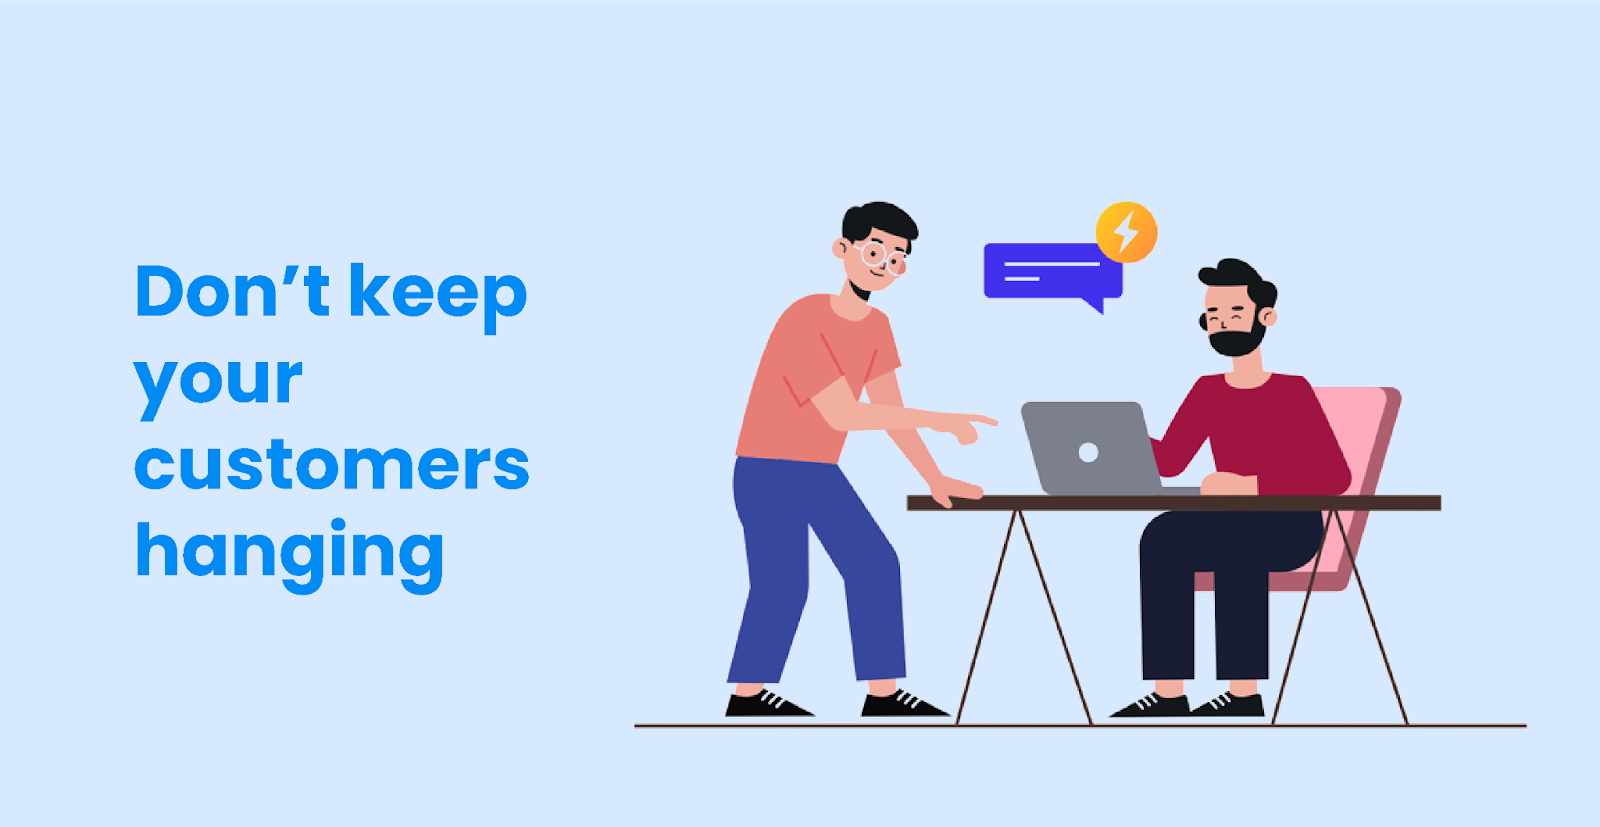 Don’t keep your customers hanging | A text image of "Don’t keep your customers hanging" with two animated men in a deep conversation

